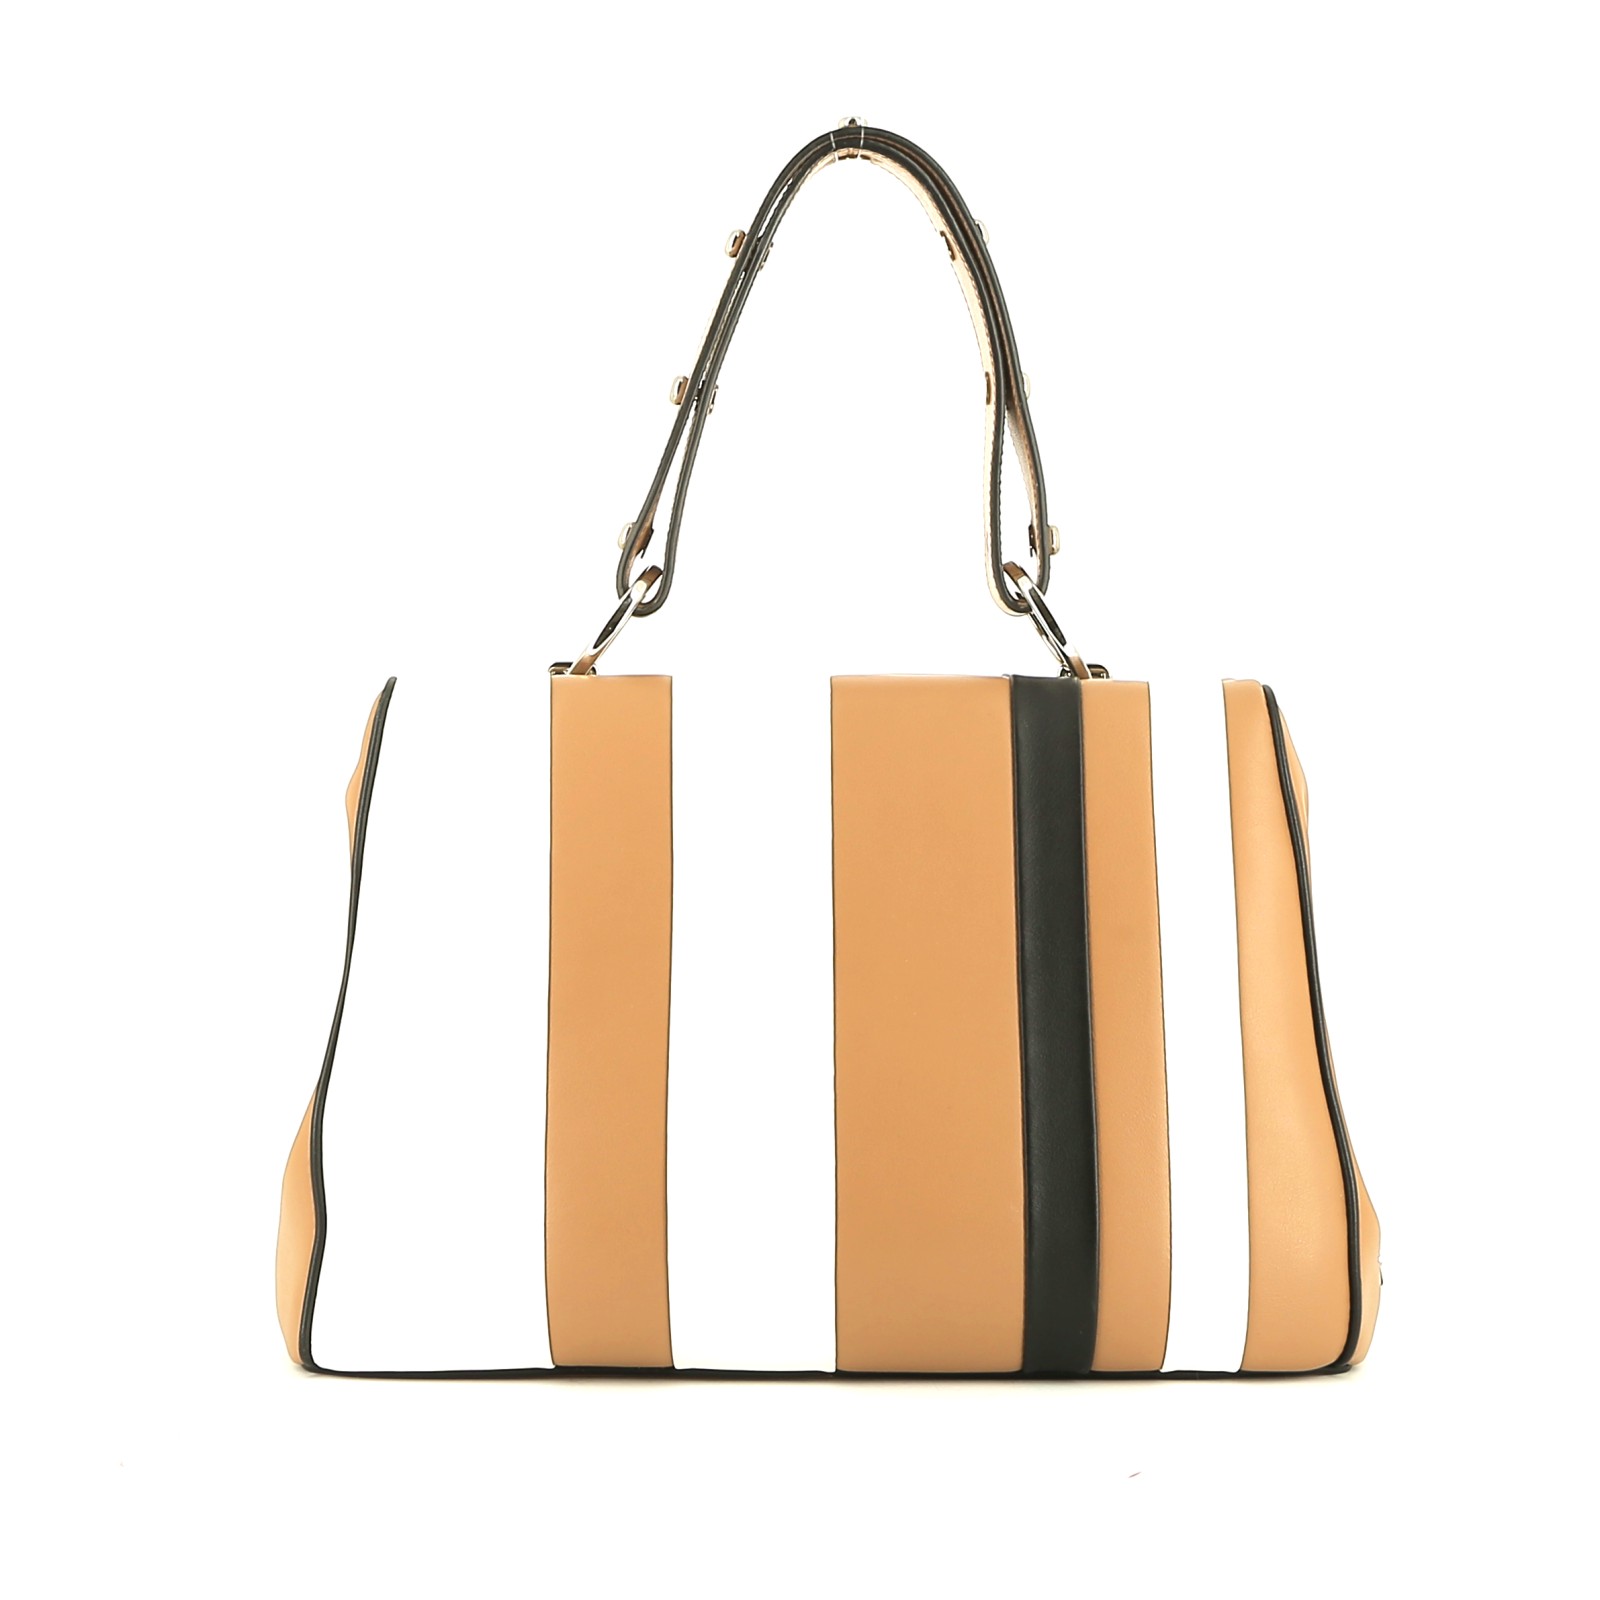 Handbag In Beige, White And Black Tricolor Leather